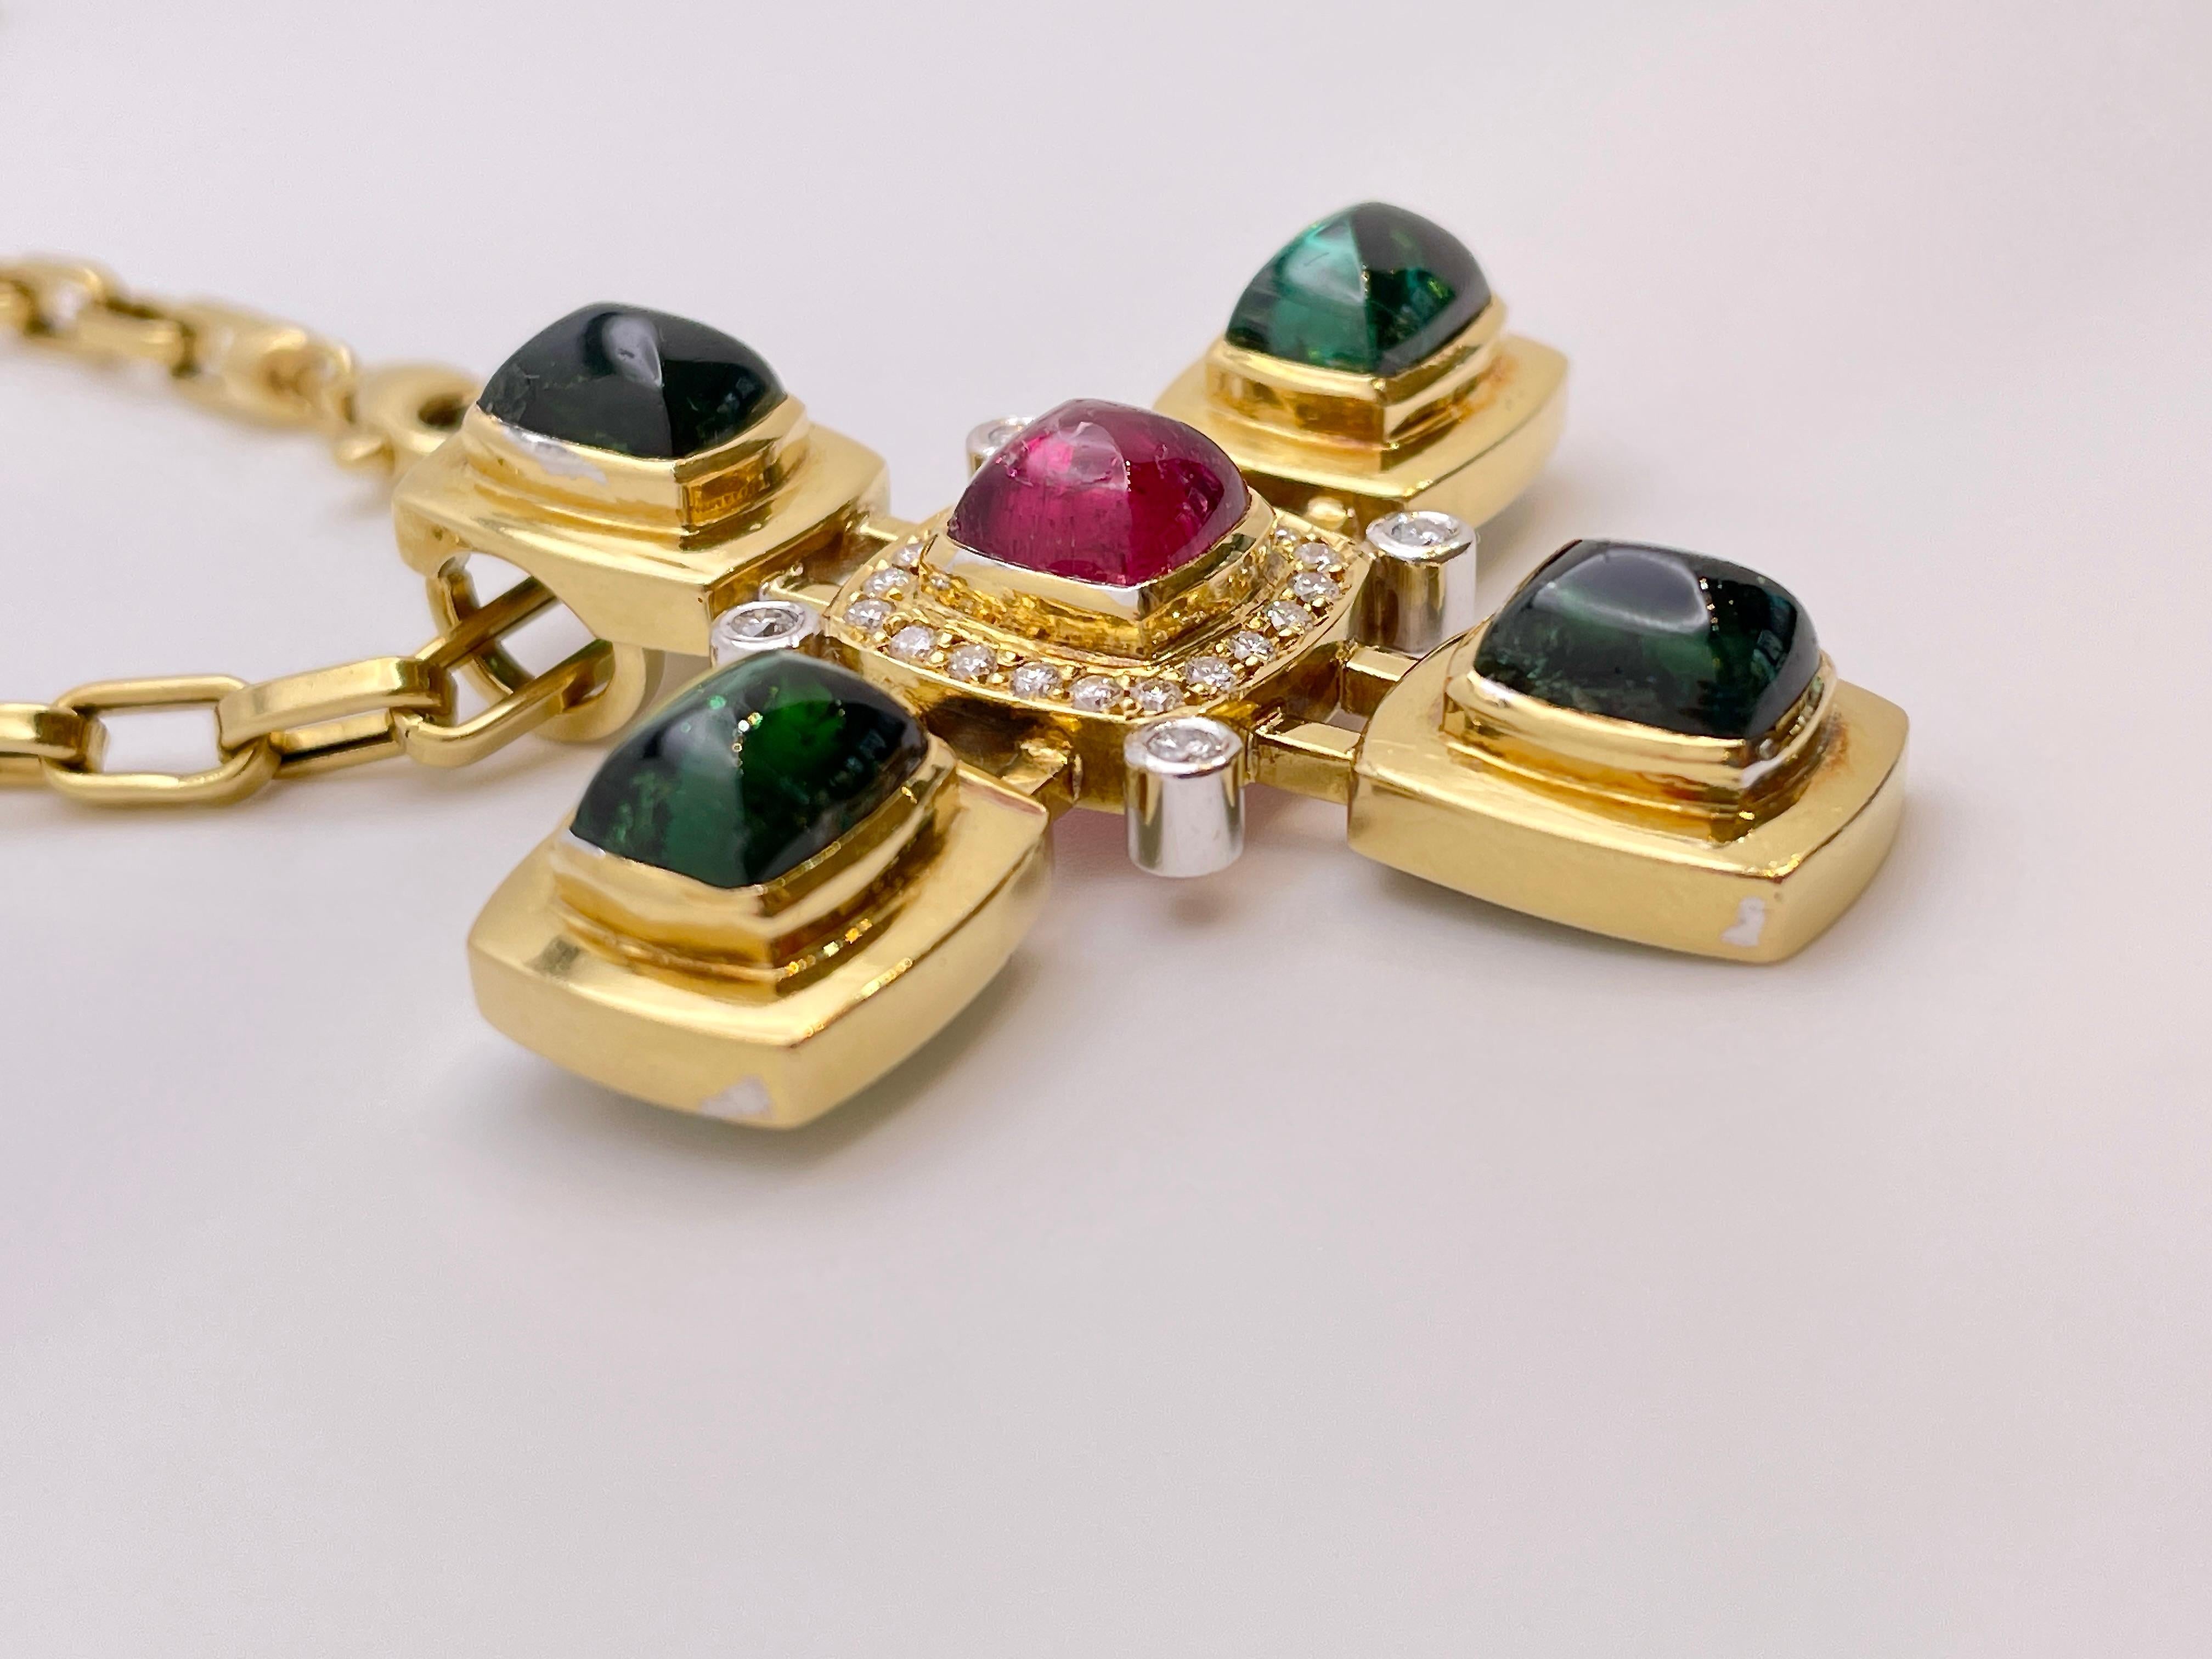 An original 18K yellow gold diamond turmaline cross pendant. Mounted with four large rectangular cabochon cut natural green turmalines stones, and centered with one rectangular cabochon cut pink turmaline. The green stones weigh approximately 5 CT